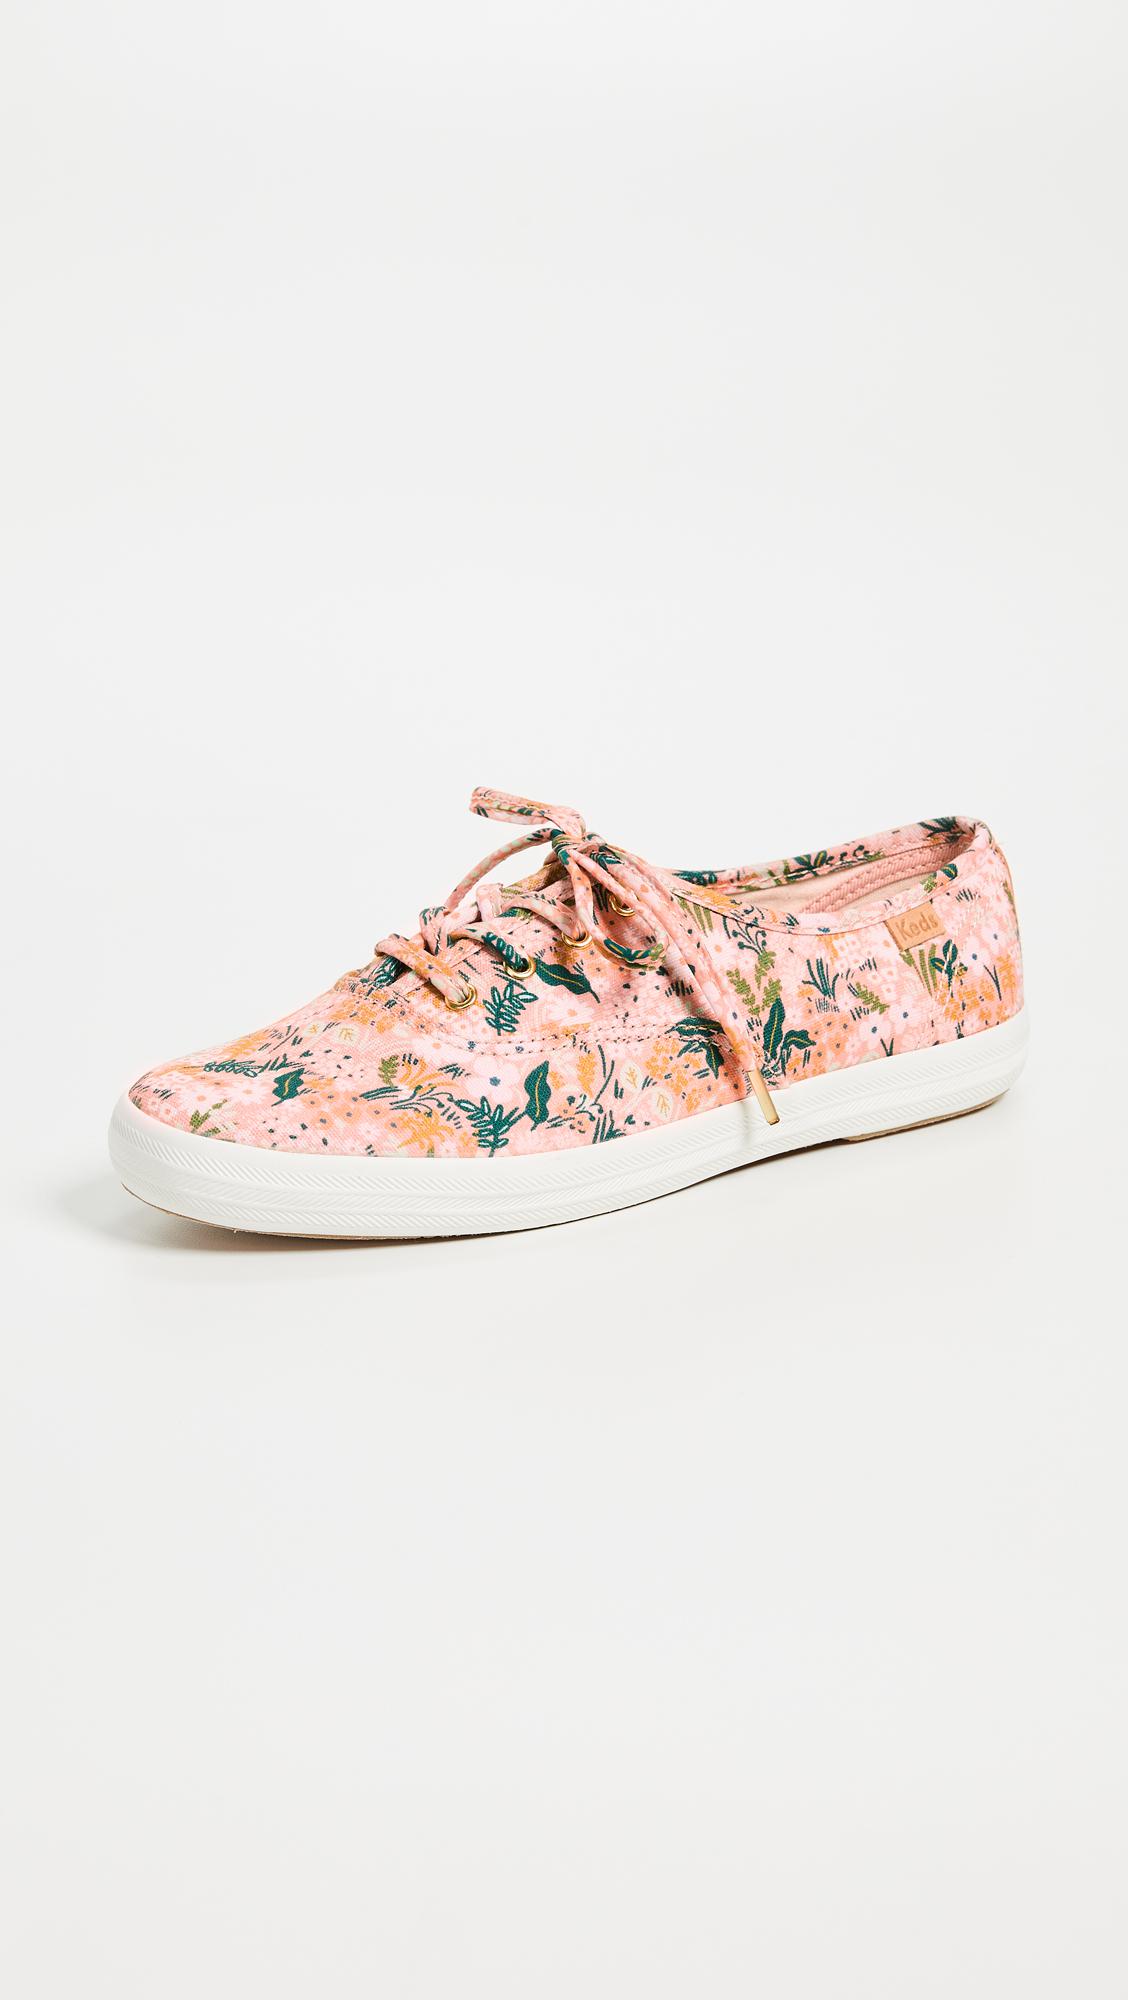 Keds X Rifle Paper Co Ch Sneakers in 